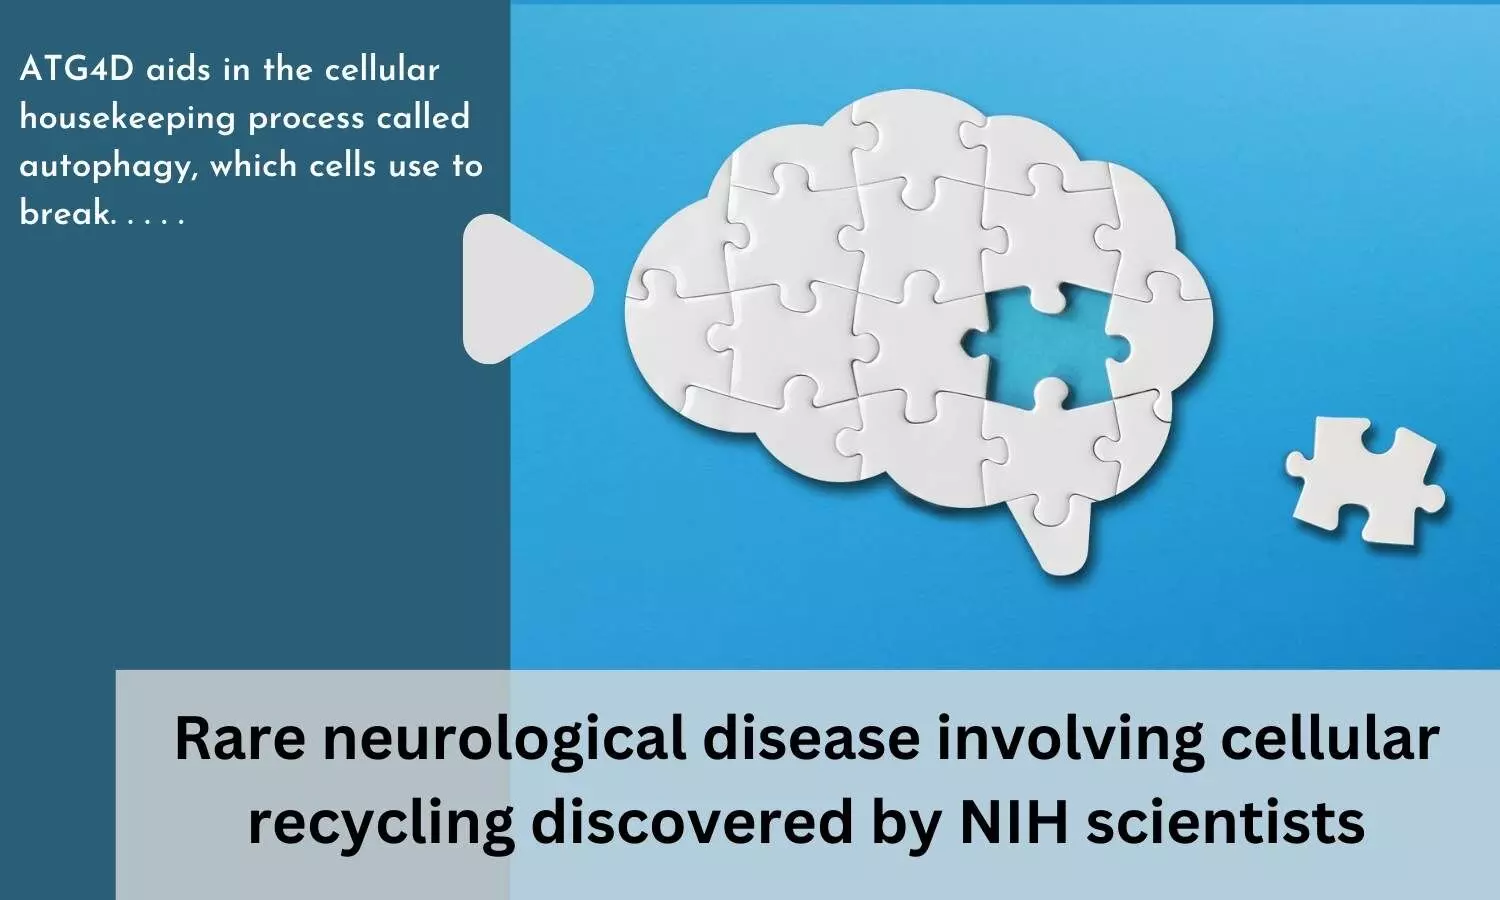 Rare neurological disease involving cellular recycling discovered by NIH scientists